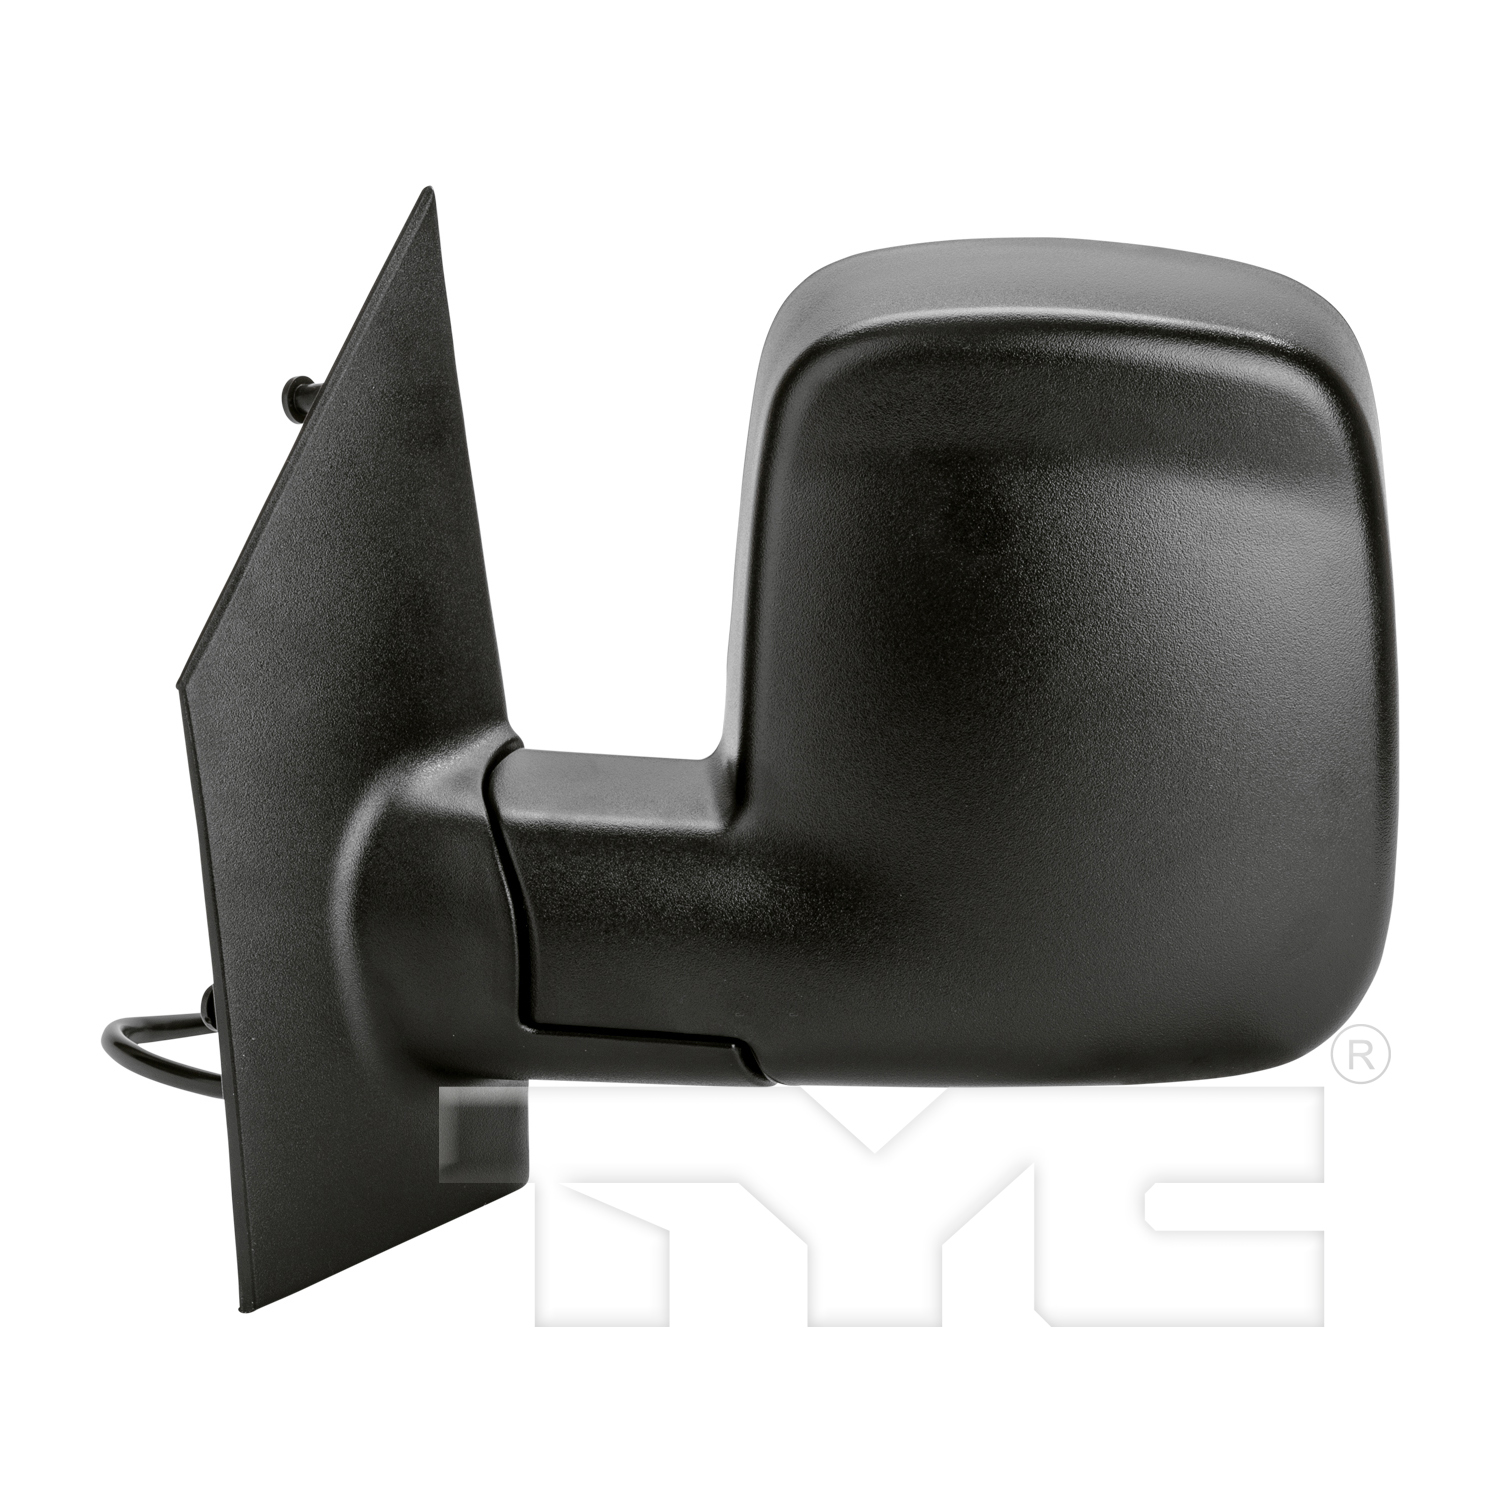 Aftermarket MIRRORS for CHEVROLET - EXPRESS 2500, EXPRESS 2500,03-07,LT Mirror outside rear view